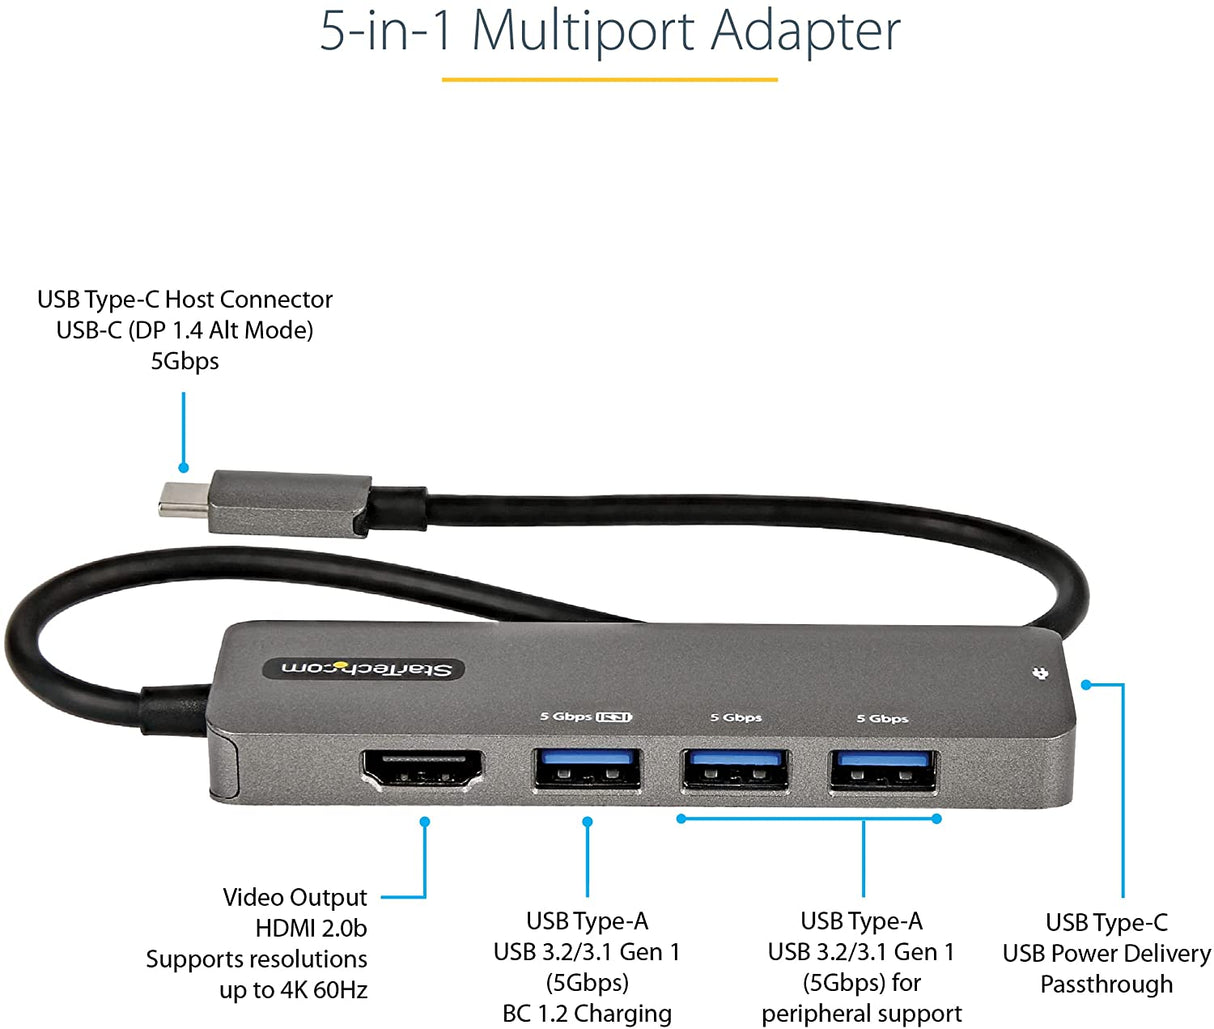 Product  StarTech.com 4-Port USB-C Hub with 100W Power Delivery